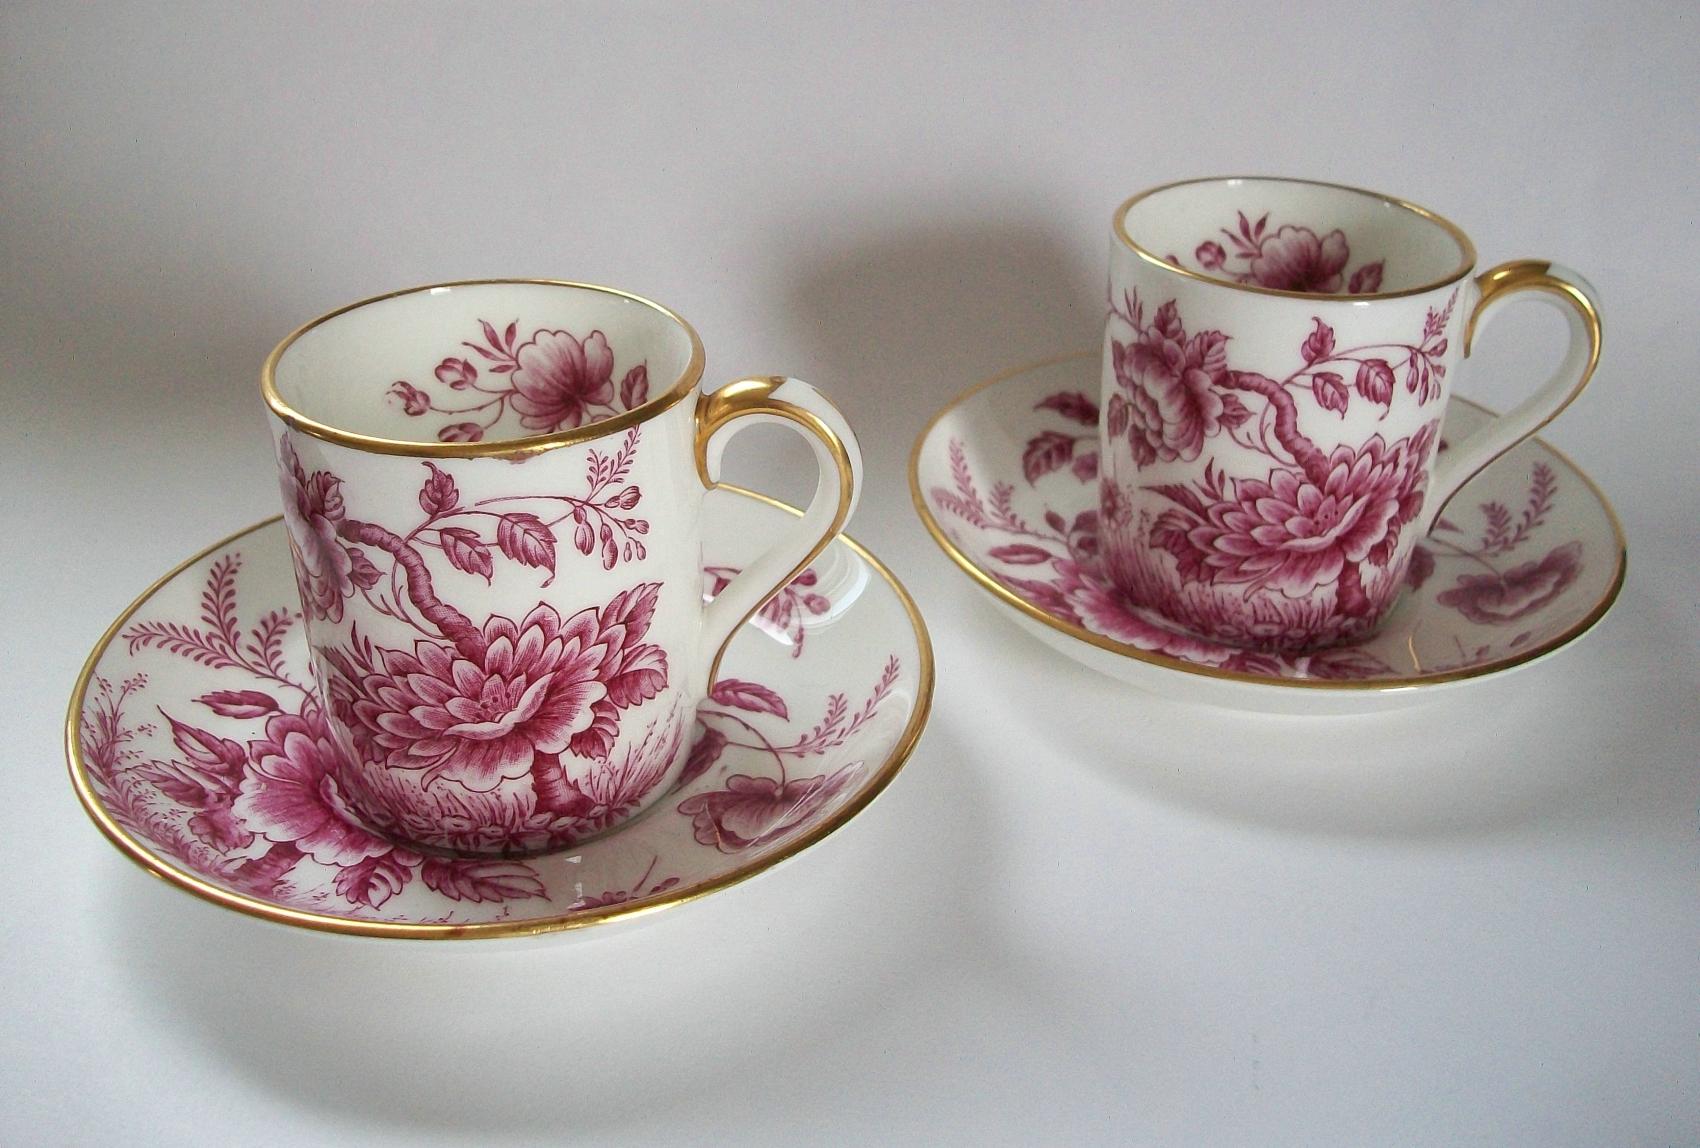 E. BRAIN & CO. LTD. - 'Peony' - Vintage transfer decorated bone china demitasse cups and saucers - manufactured at Foley Works, Fenton - featuring over abundant florals in pink with gilt borders/trim - each piece signed - United Kingdom - circa